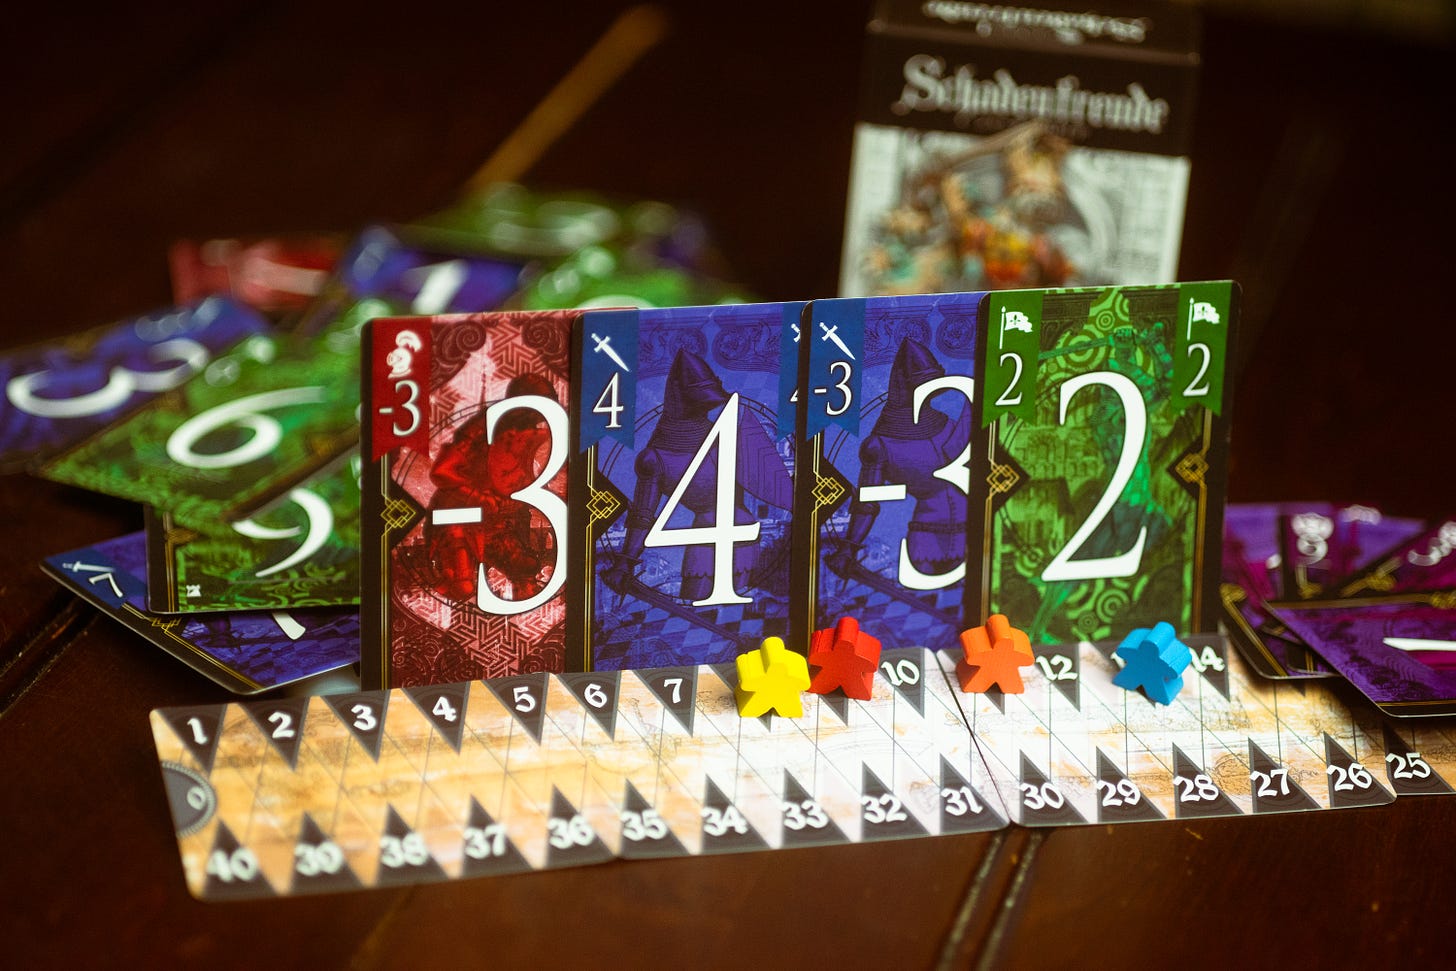 Cards from the game Schadenfreude displayed alongside the scoring track for the game. The box is visible, but out of focus, in the background.